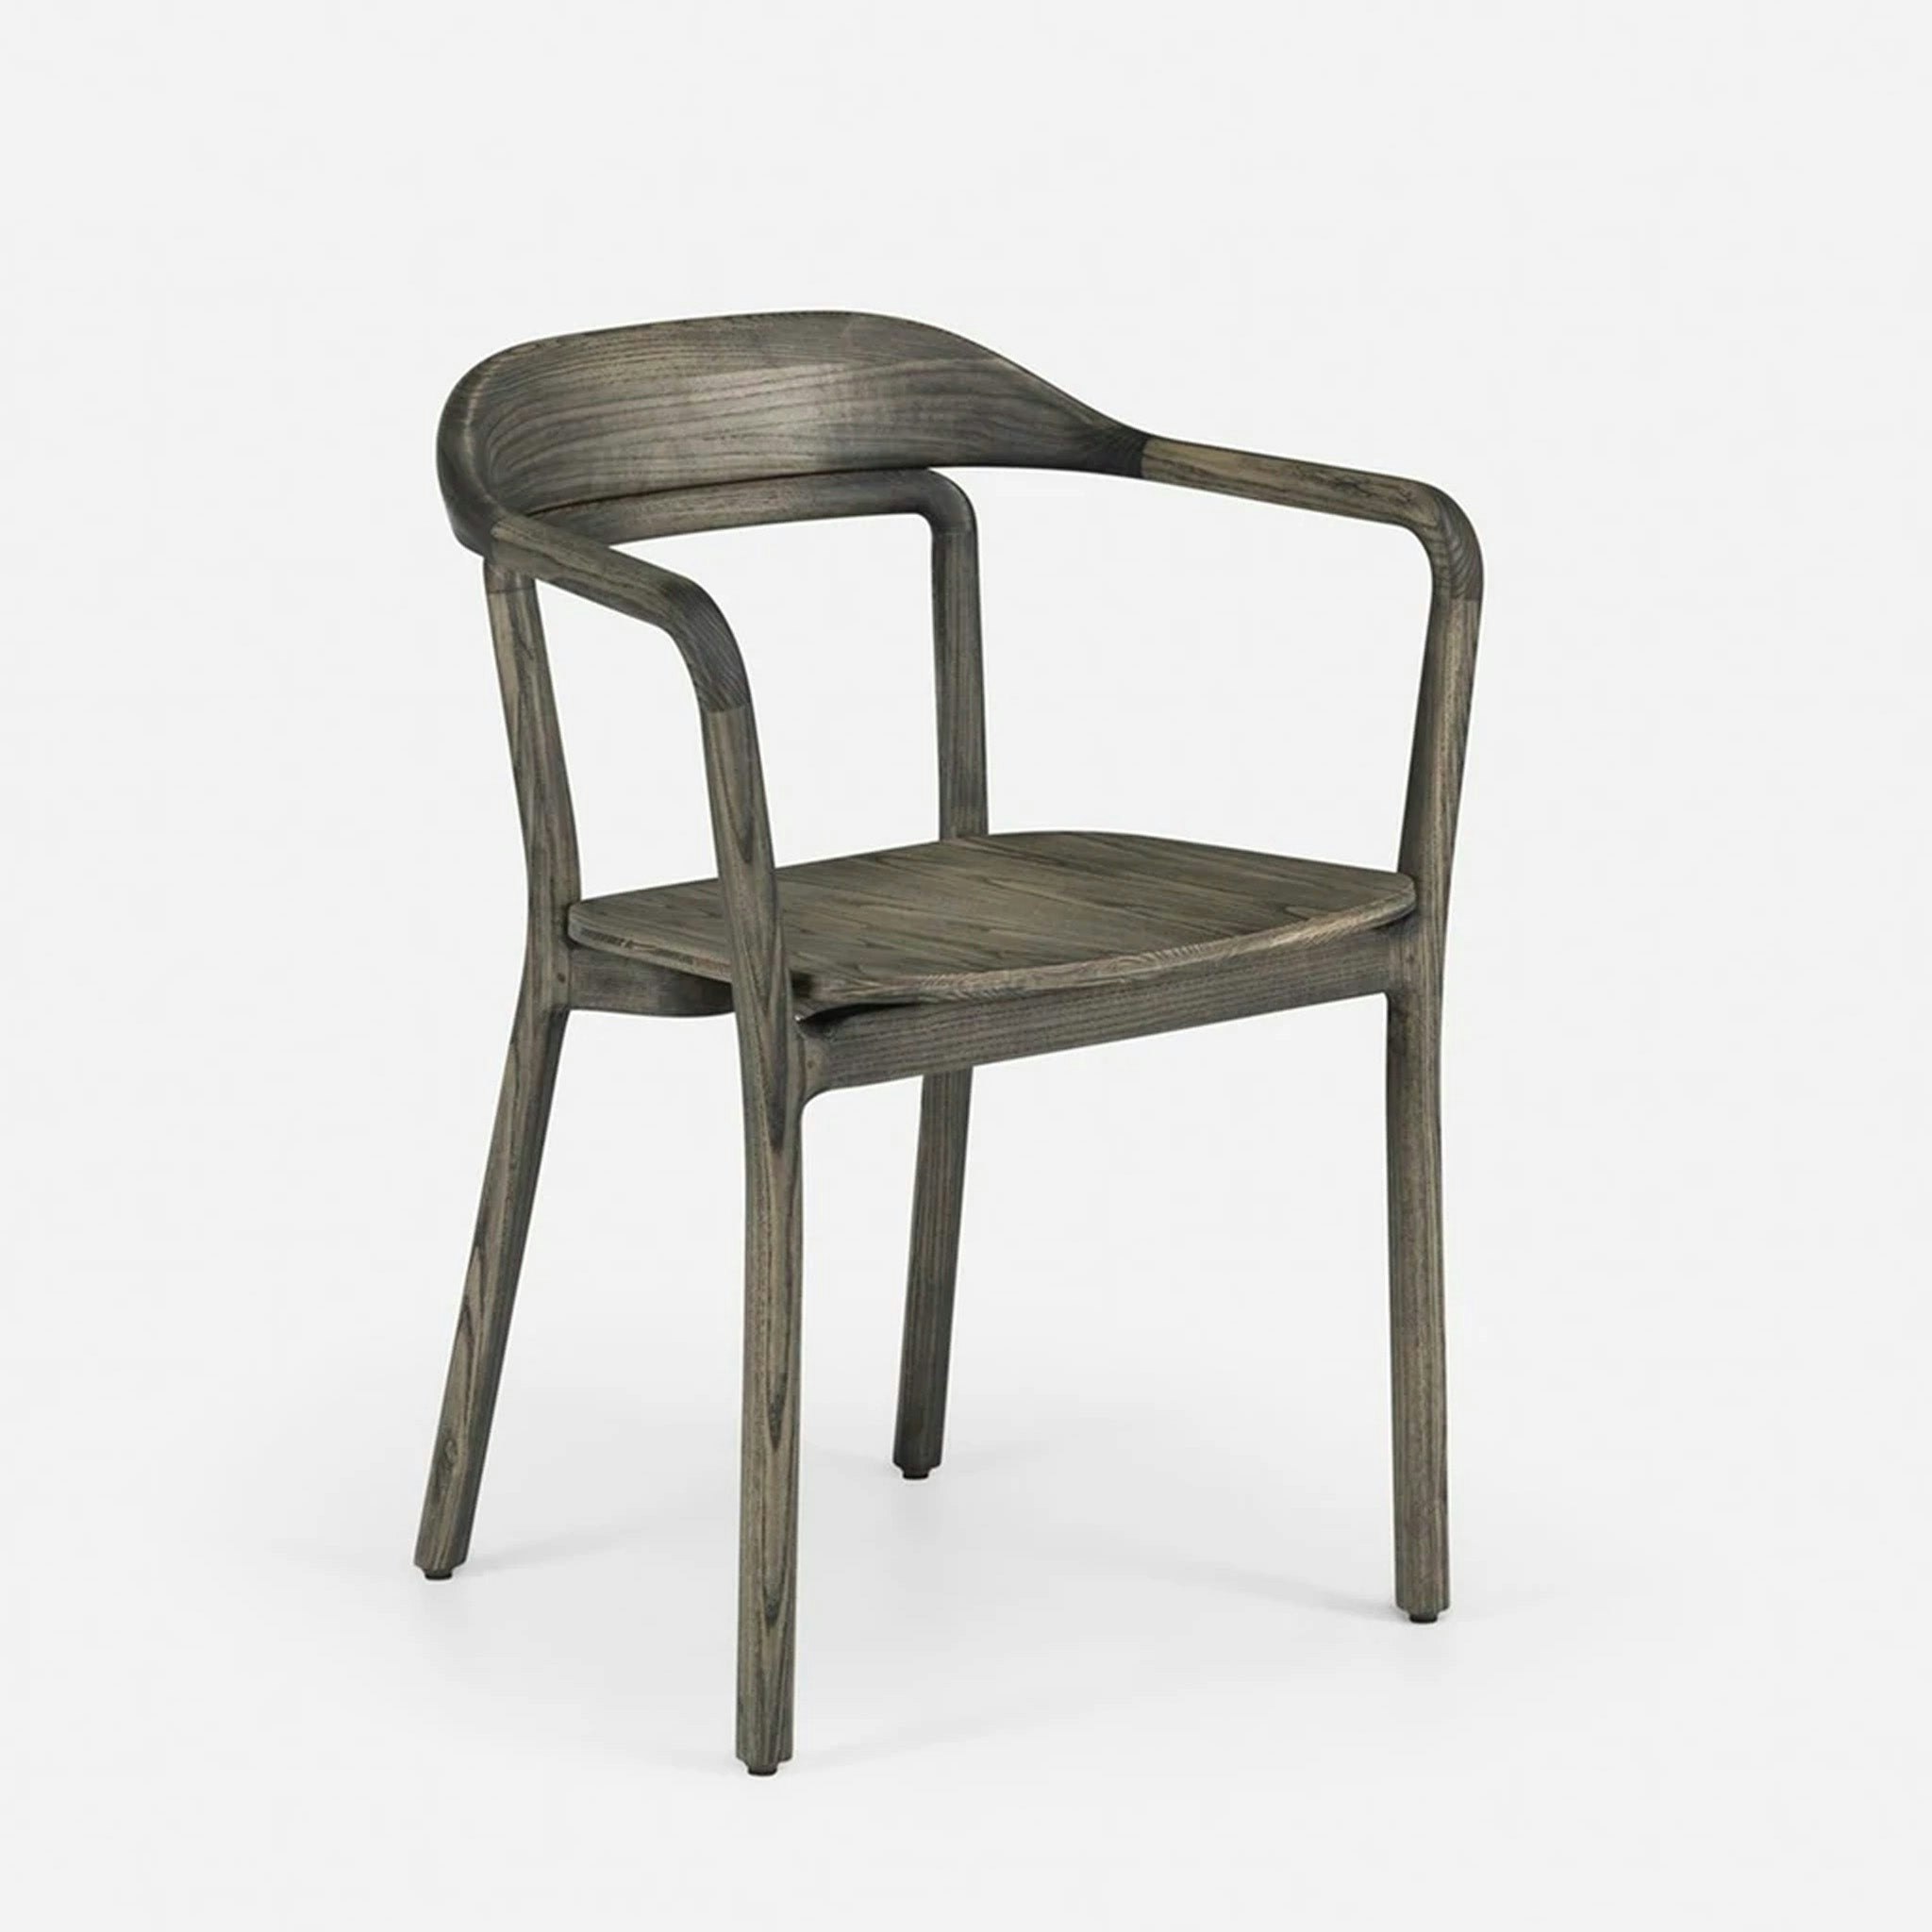 Duet Chair Timber Seat by Lyndon Neri and Rossana Hu